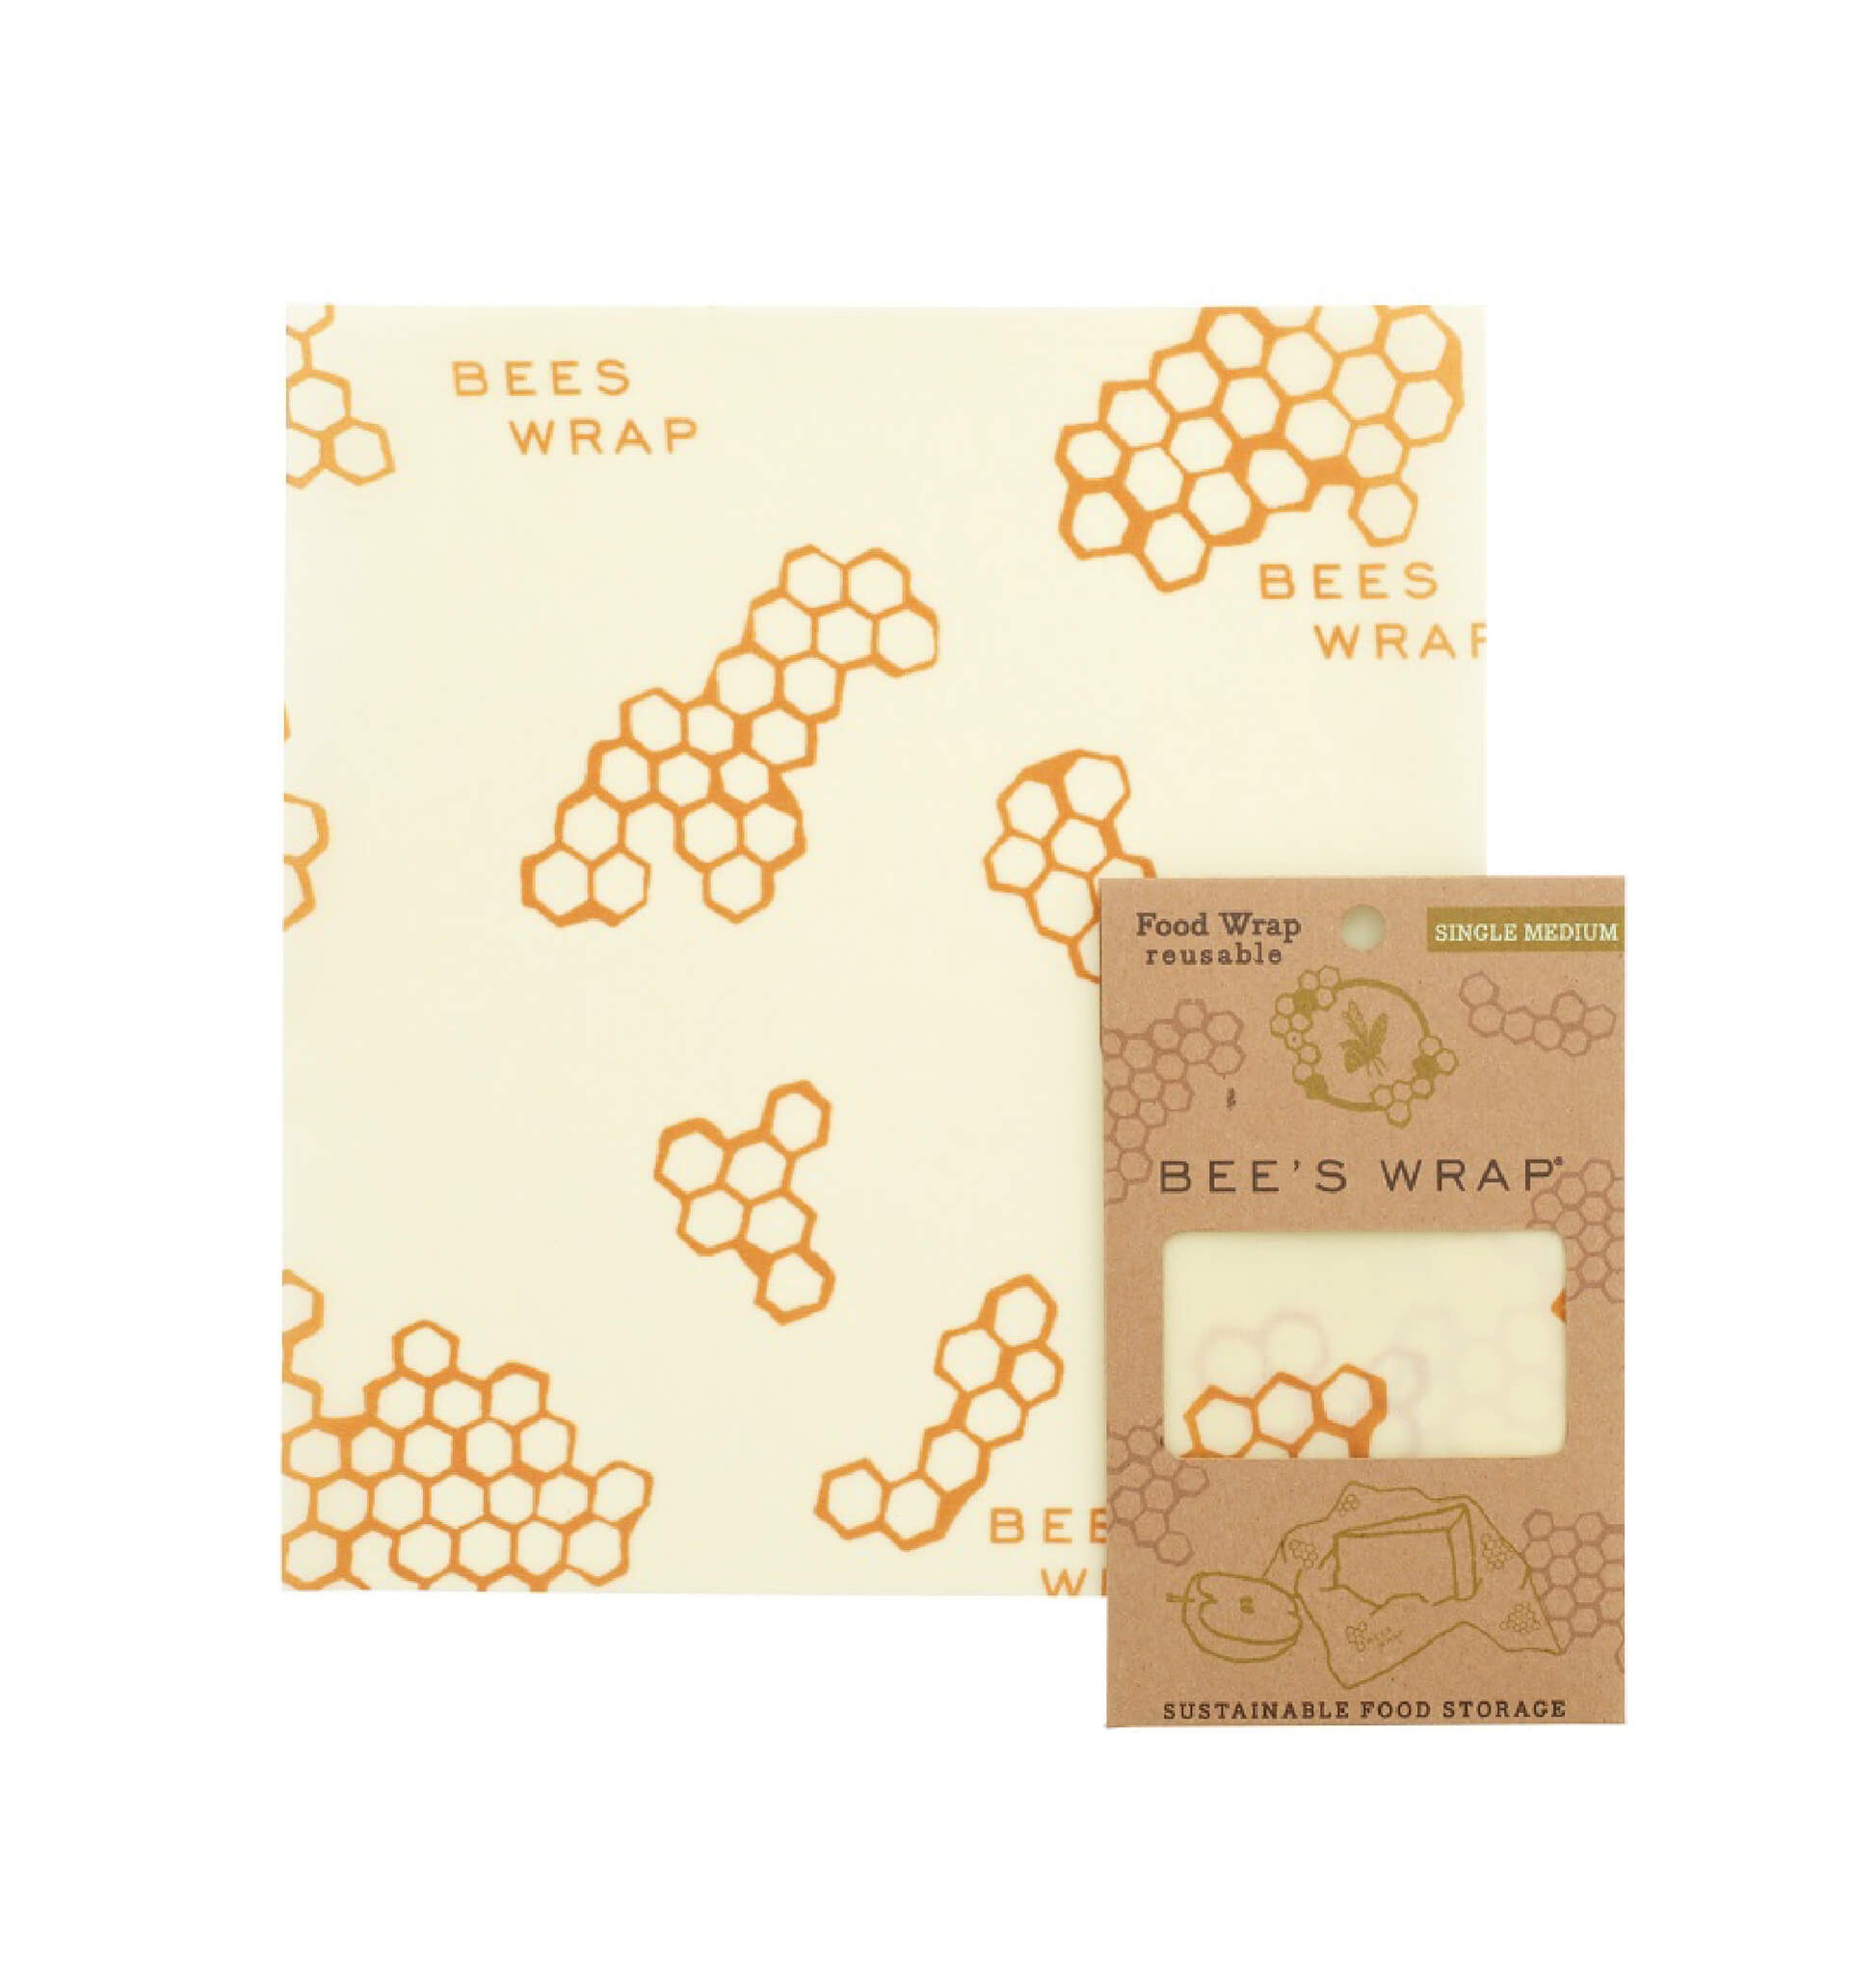 beeswax wrap medium single next to package